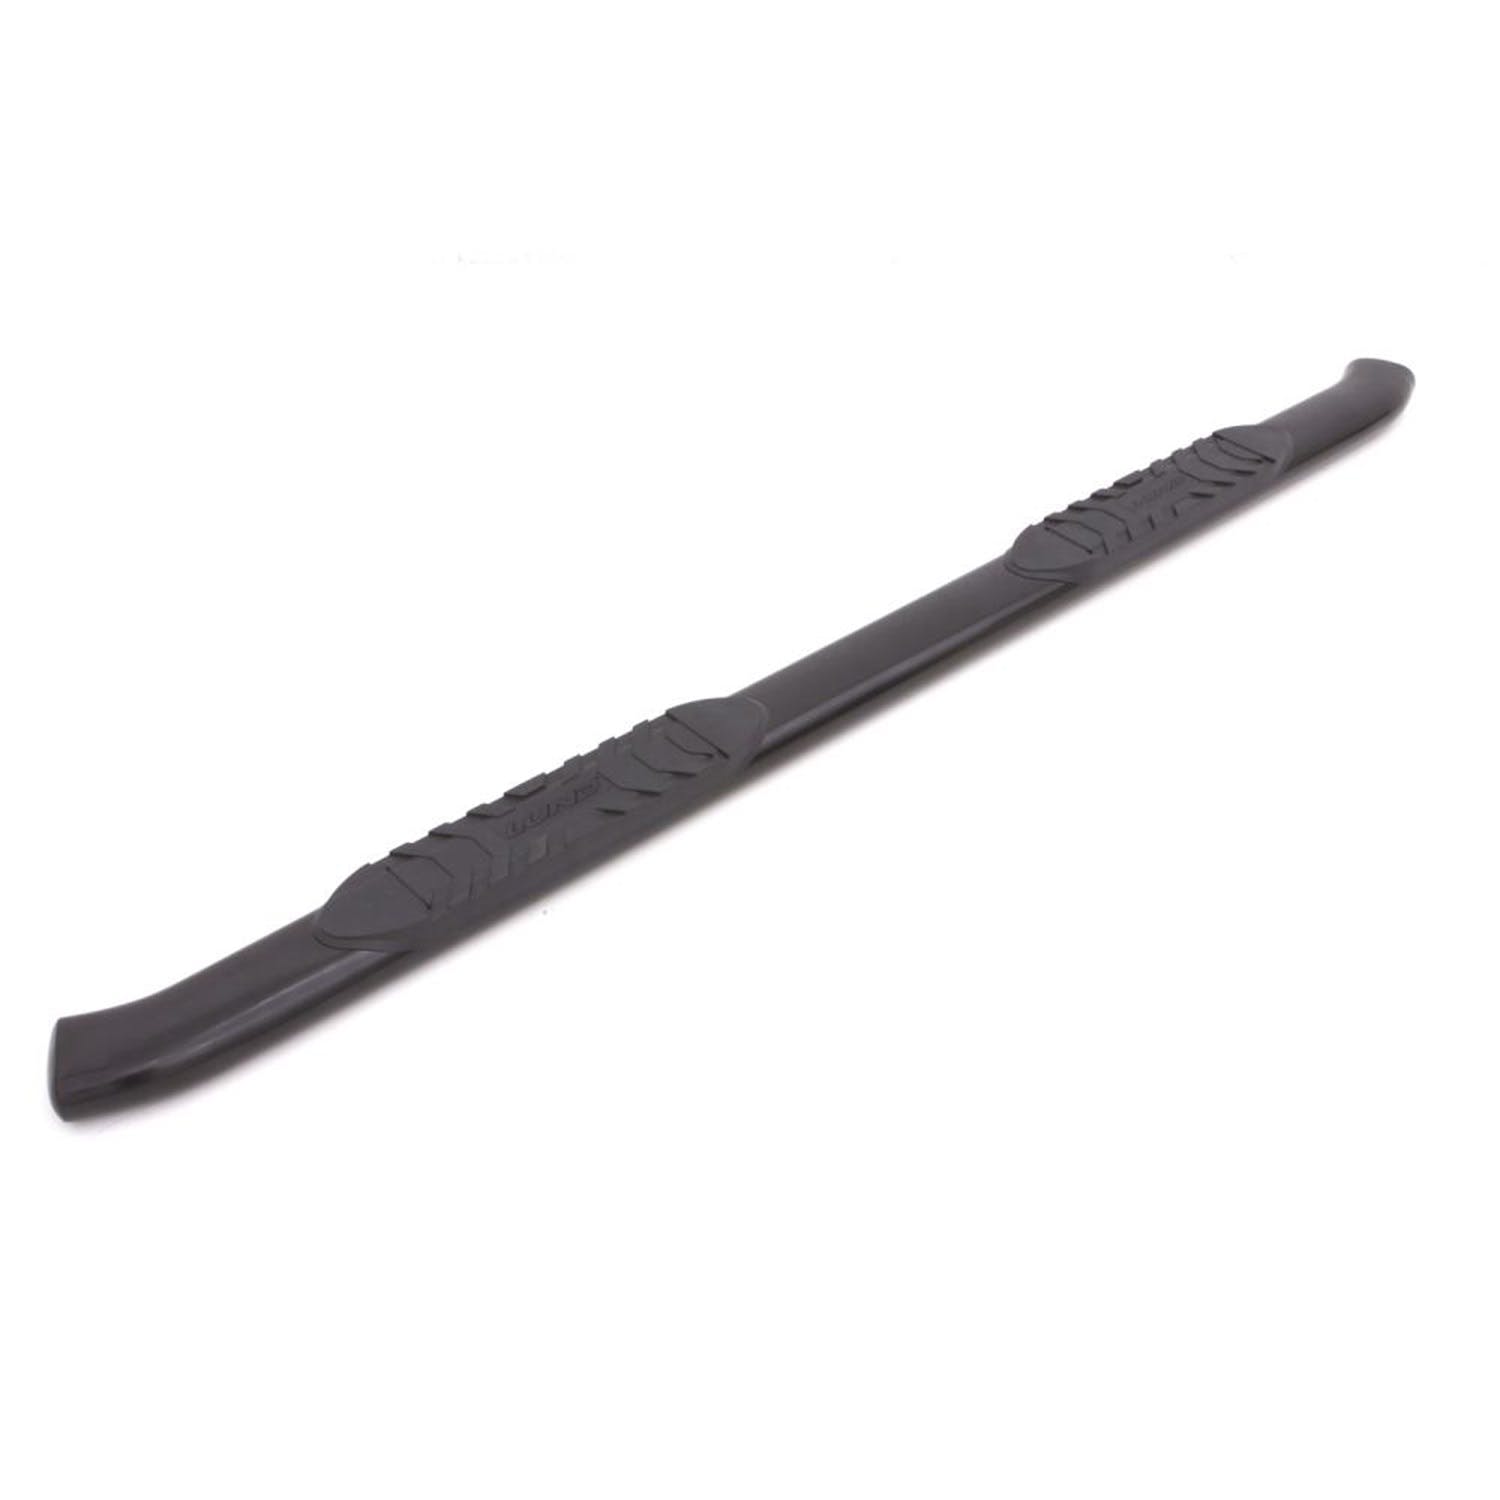 LUND 23810688 5 Inch Oval Curved Nerf Bar - Black 5 In OVAL CURVED STEEL